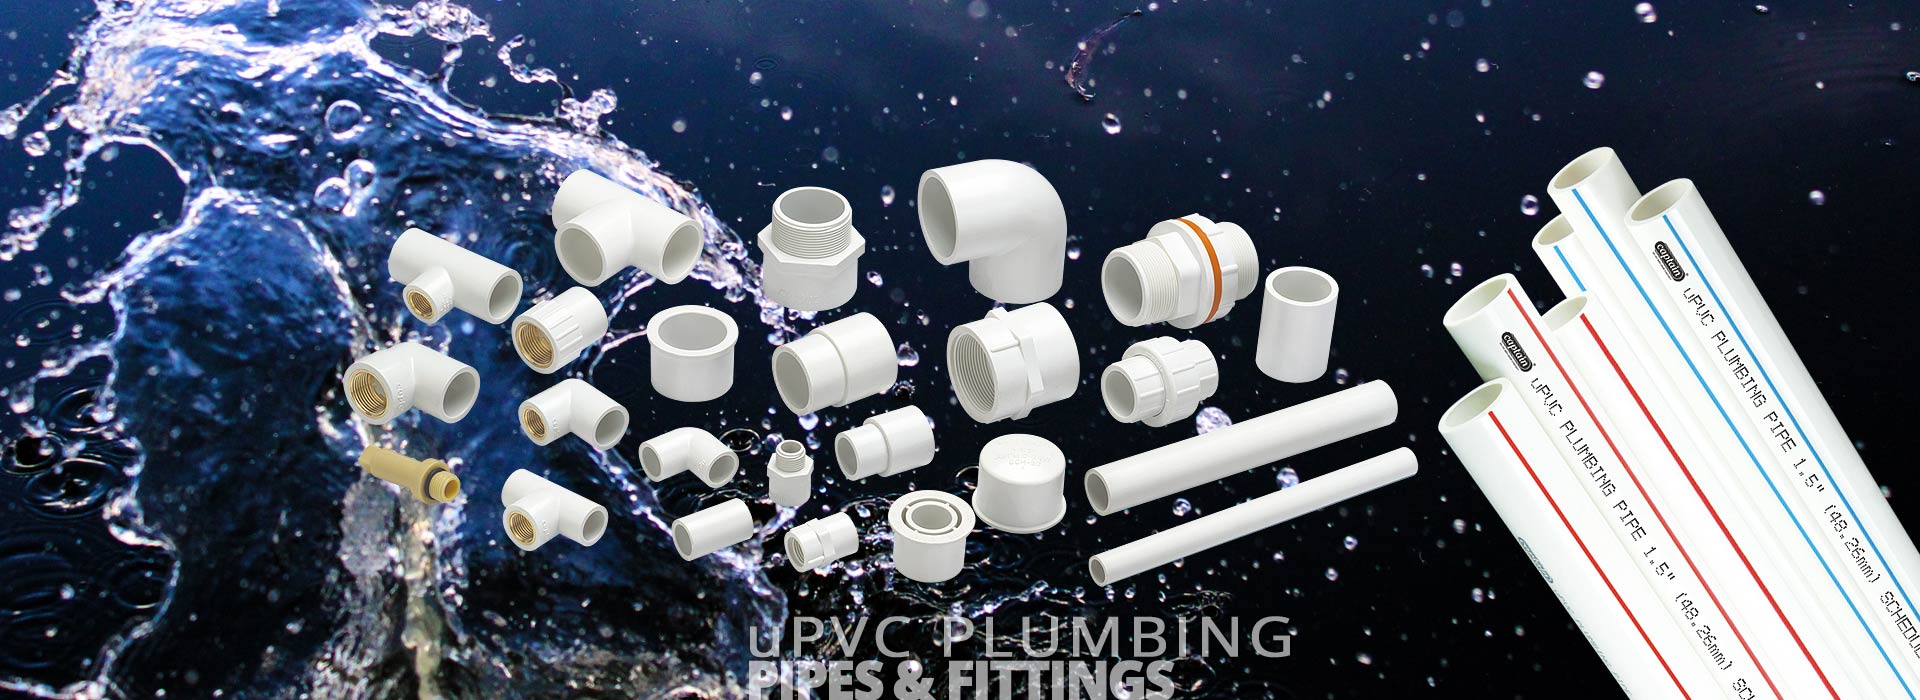 uPVC Plumbing Pipes and Fittings from Captain Pipes Ltd.